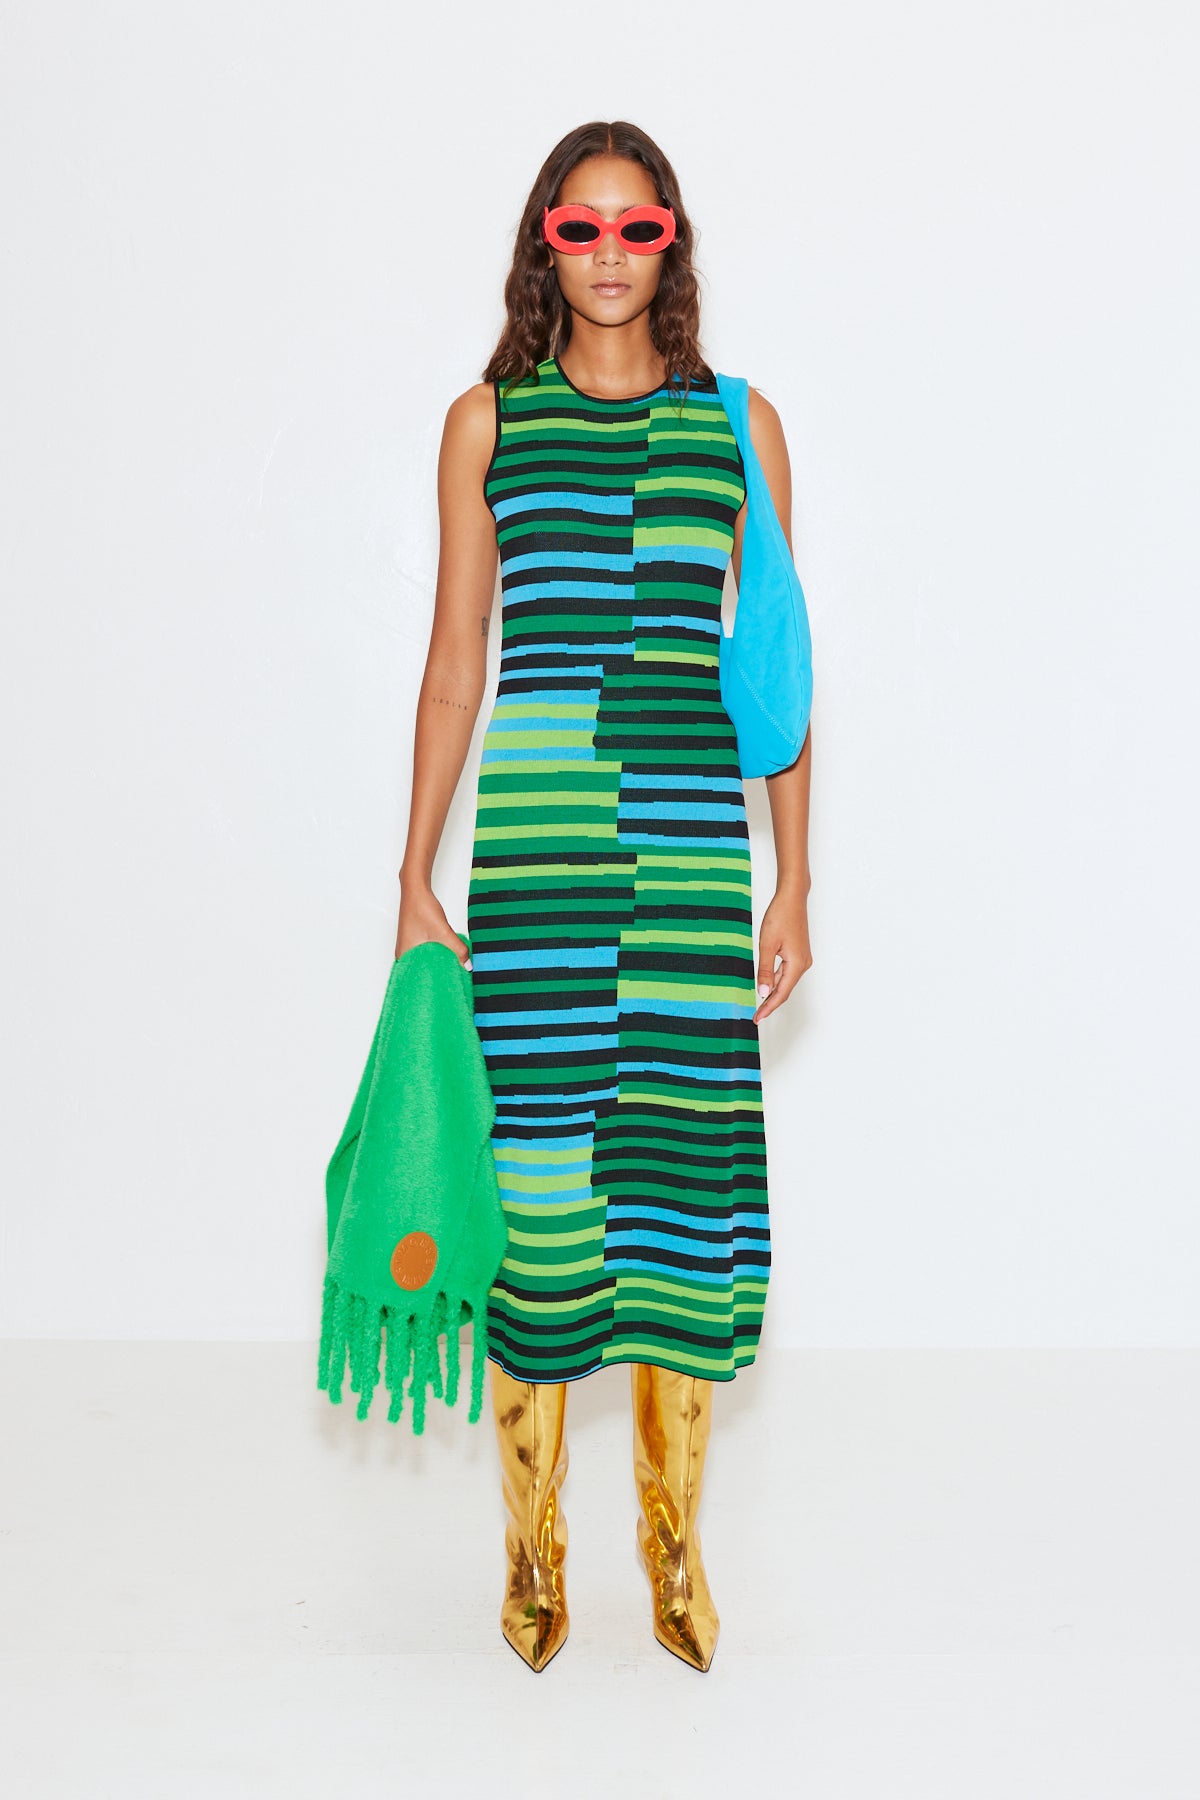 Knits By Sleeveless Axon Dress in Stacked Stripe